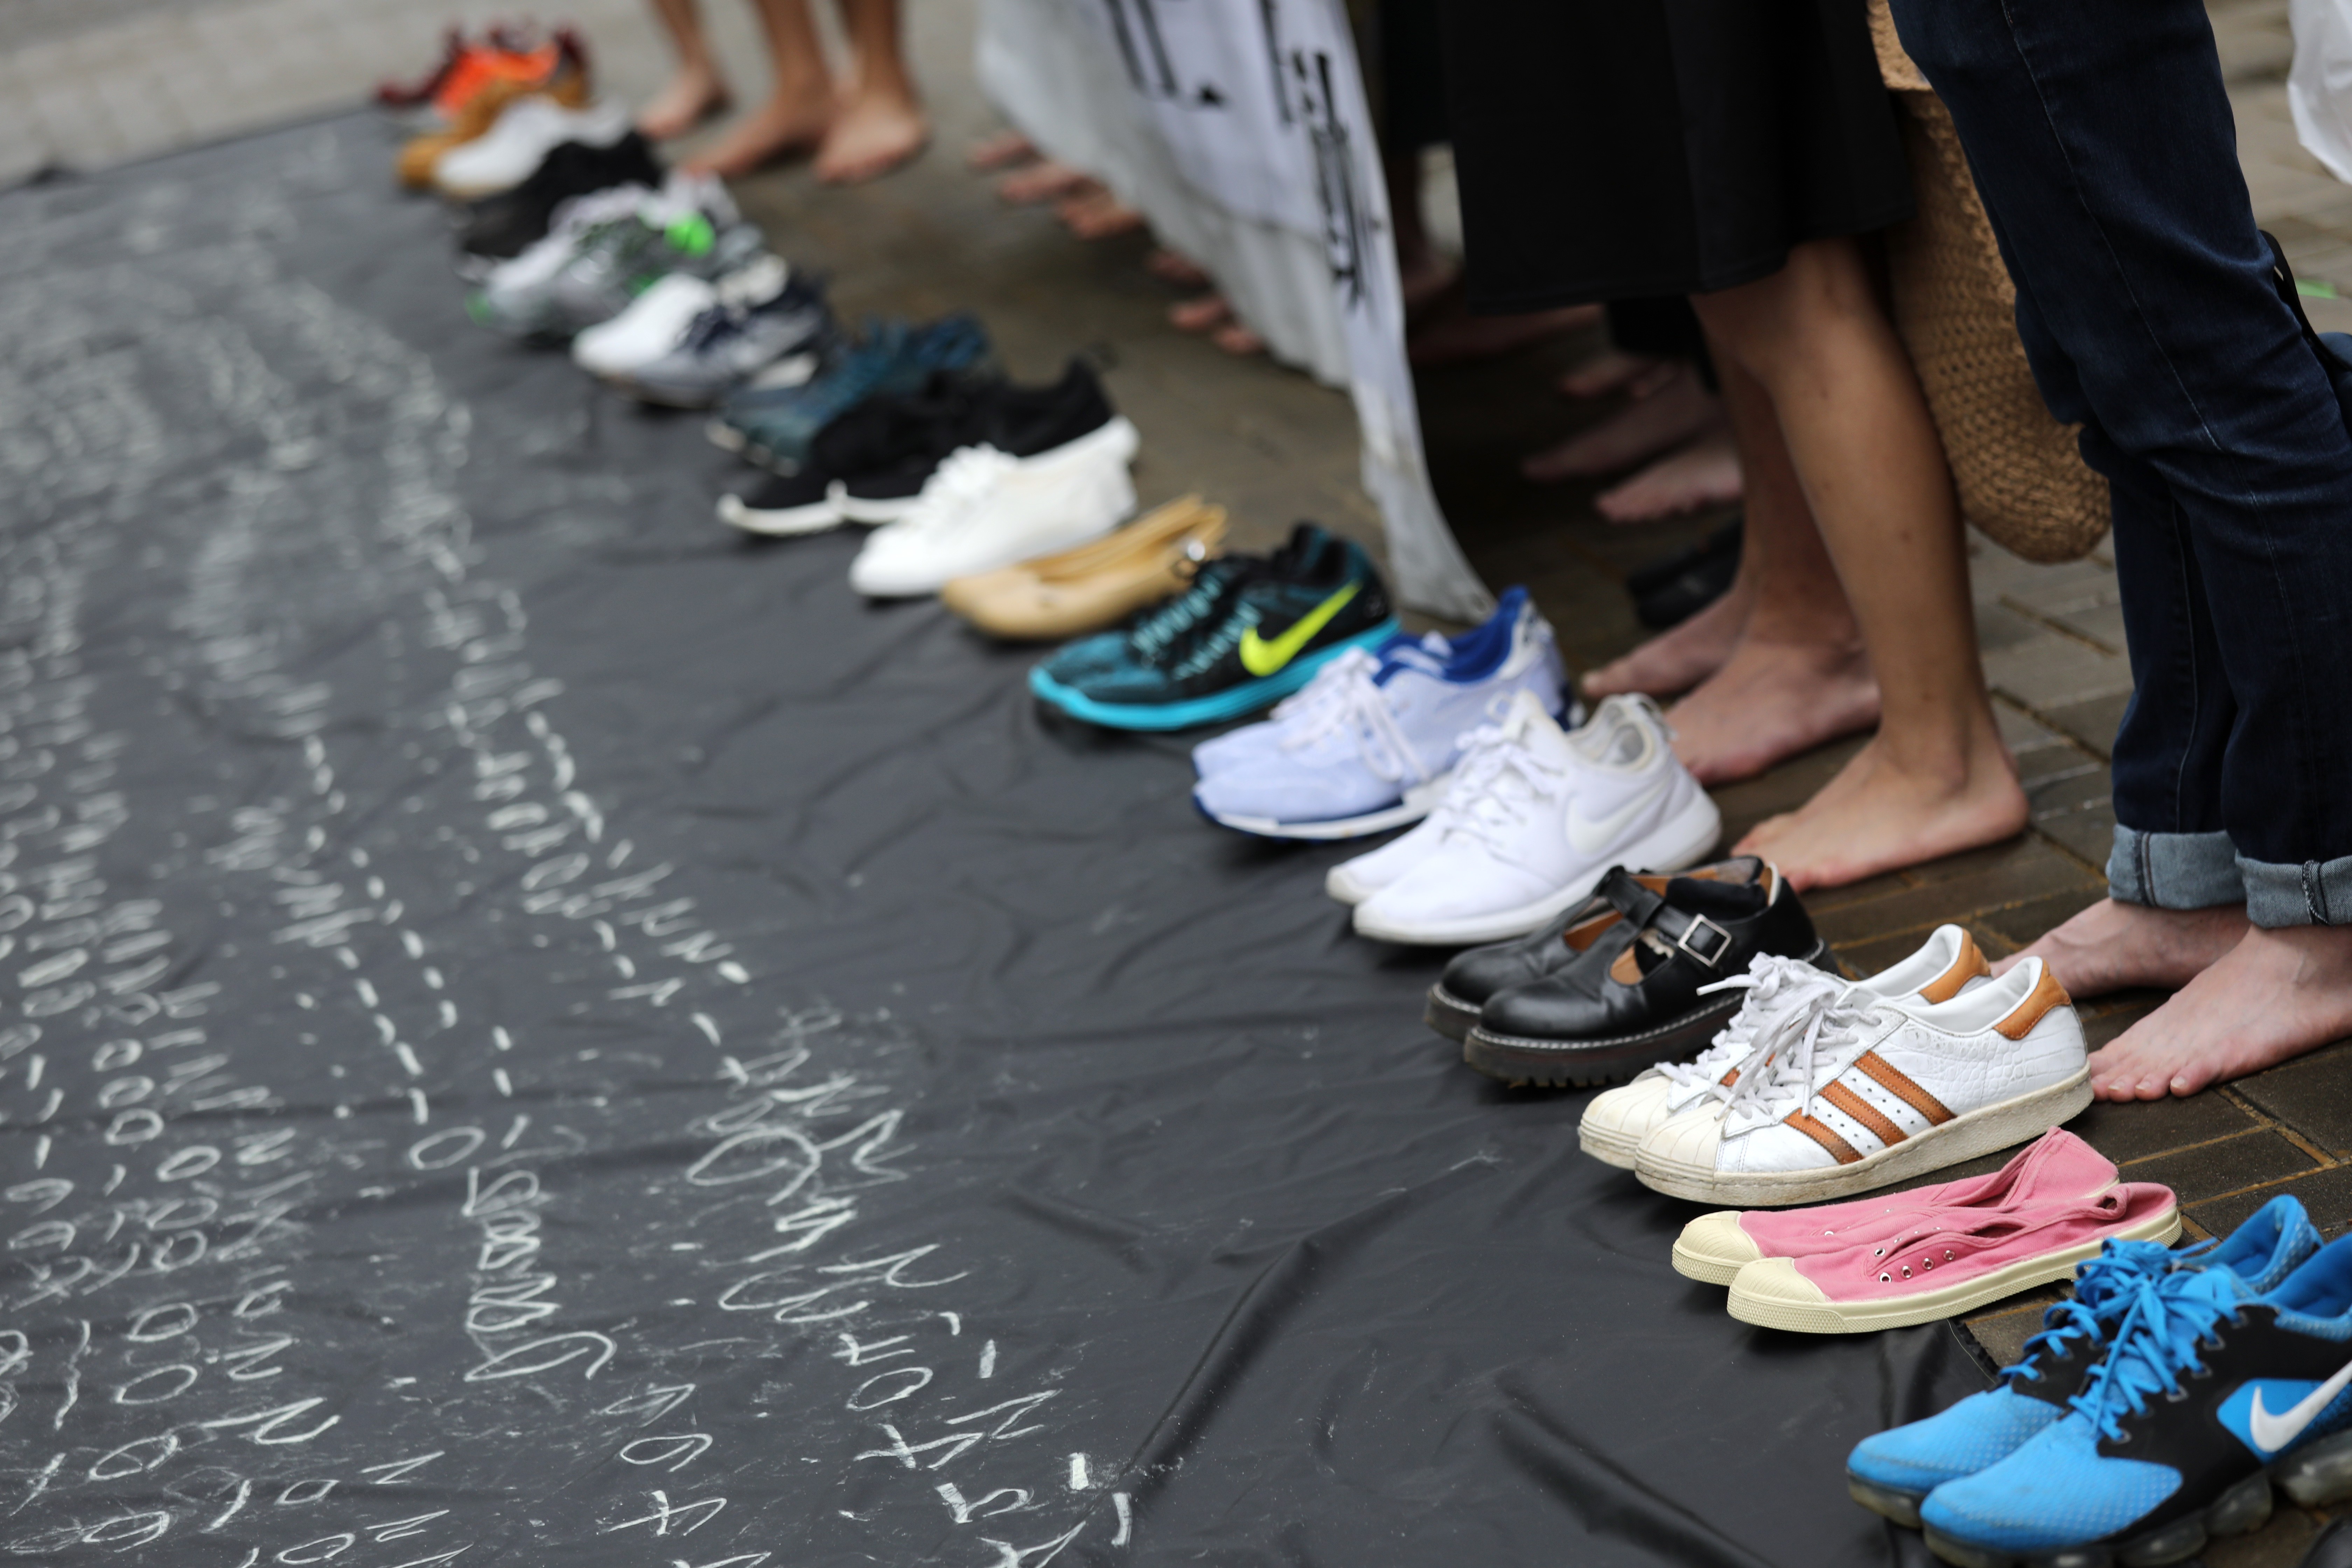 Participants of a rally last year in Hong Kong on September 18, World Suicide Prevention Day, call for more measures to help those vulnerable to suicide. Photo: Dickson Lee